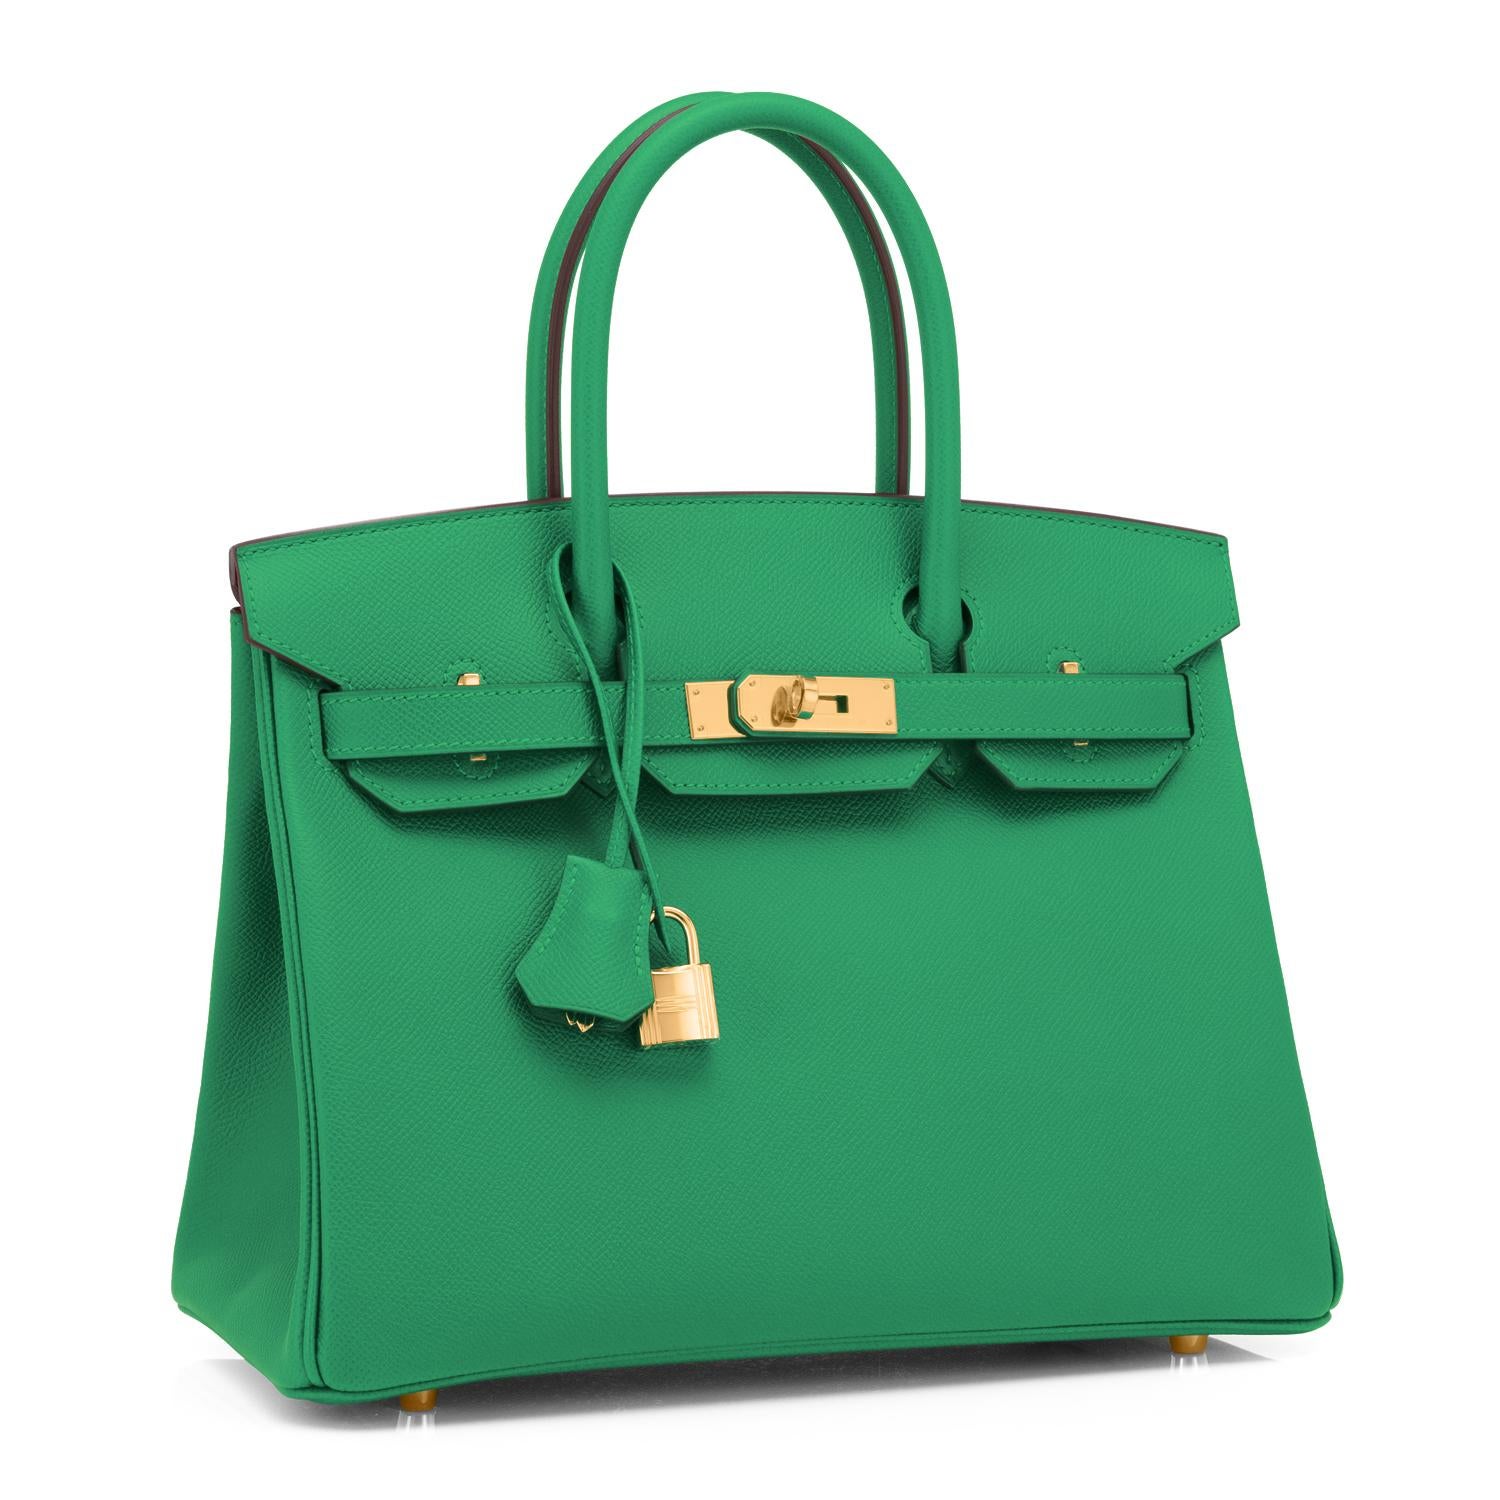 Hermes Birkin 30 Cactus Emerald Green Epsom Gold Bag Y Stamp, 2020
Sublime and rare combination! Emerald Green is the top color trend for 2021.
Brand New in Box.  Store Fresh.  Pristine Condition (with plastic on hardware).
Just purchased from